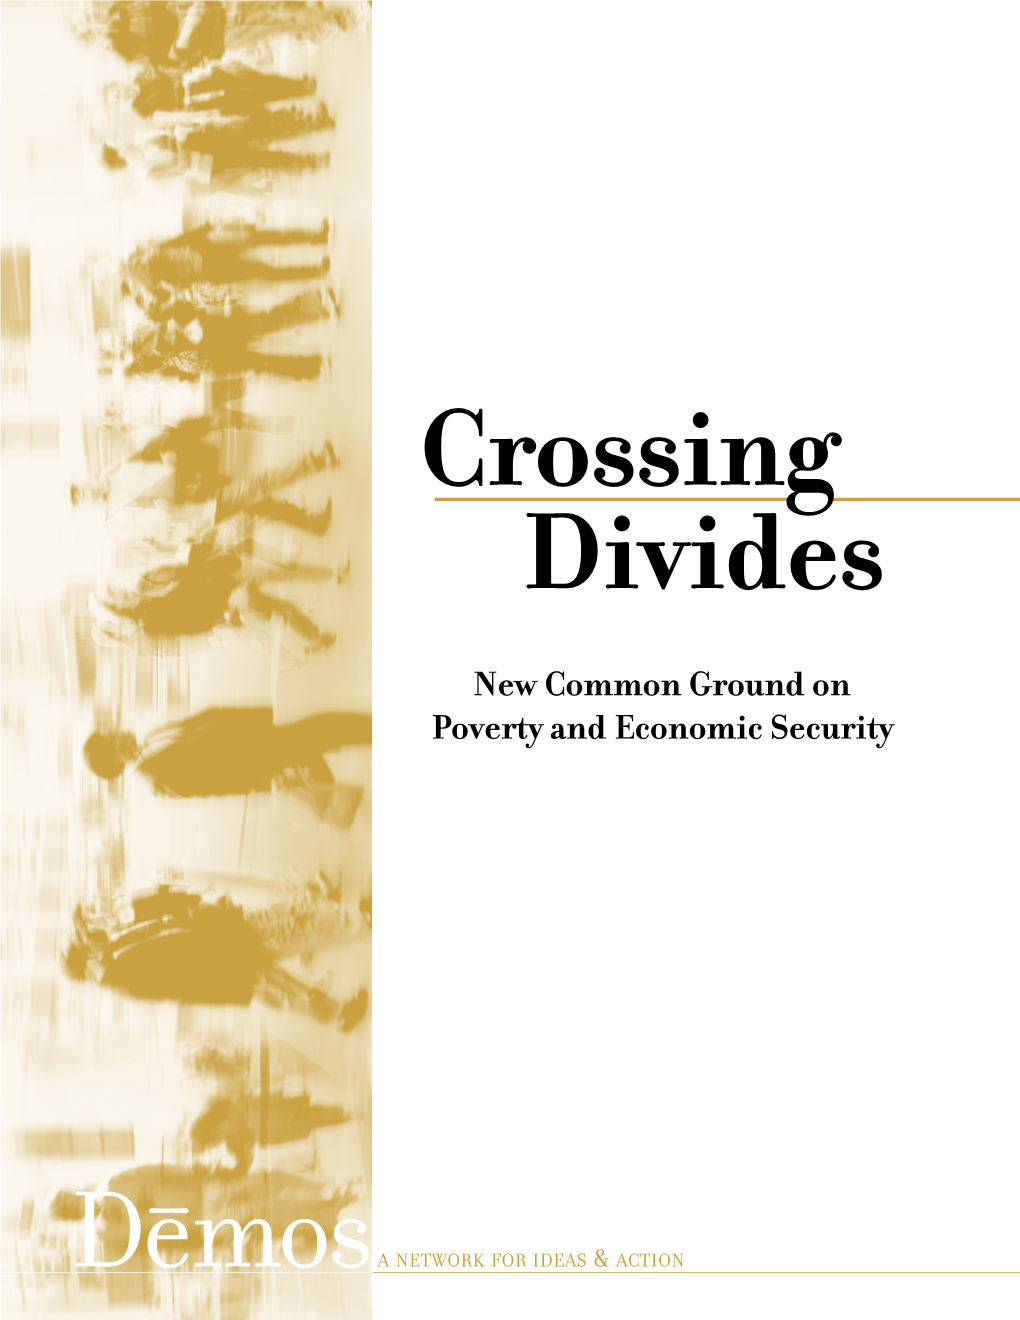 New Common Ground on Poverty and Economic Security